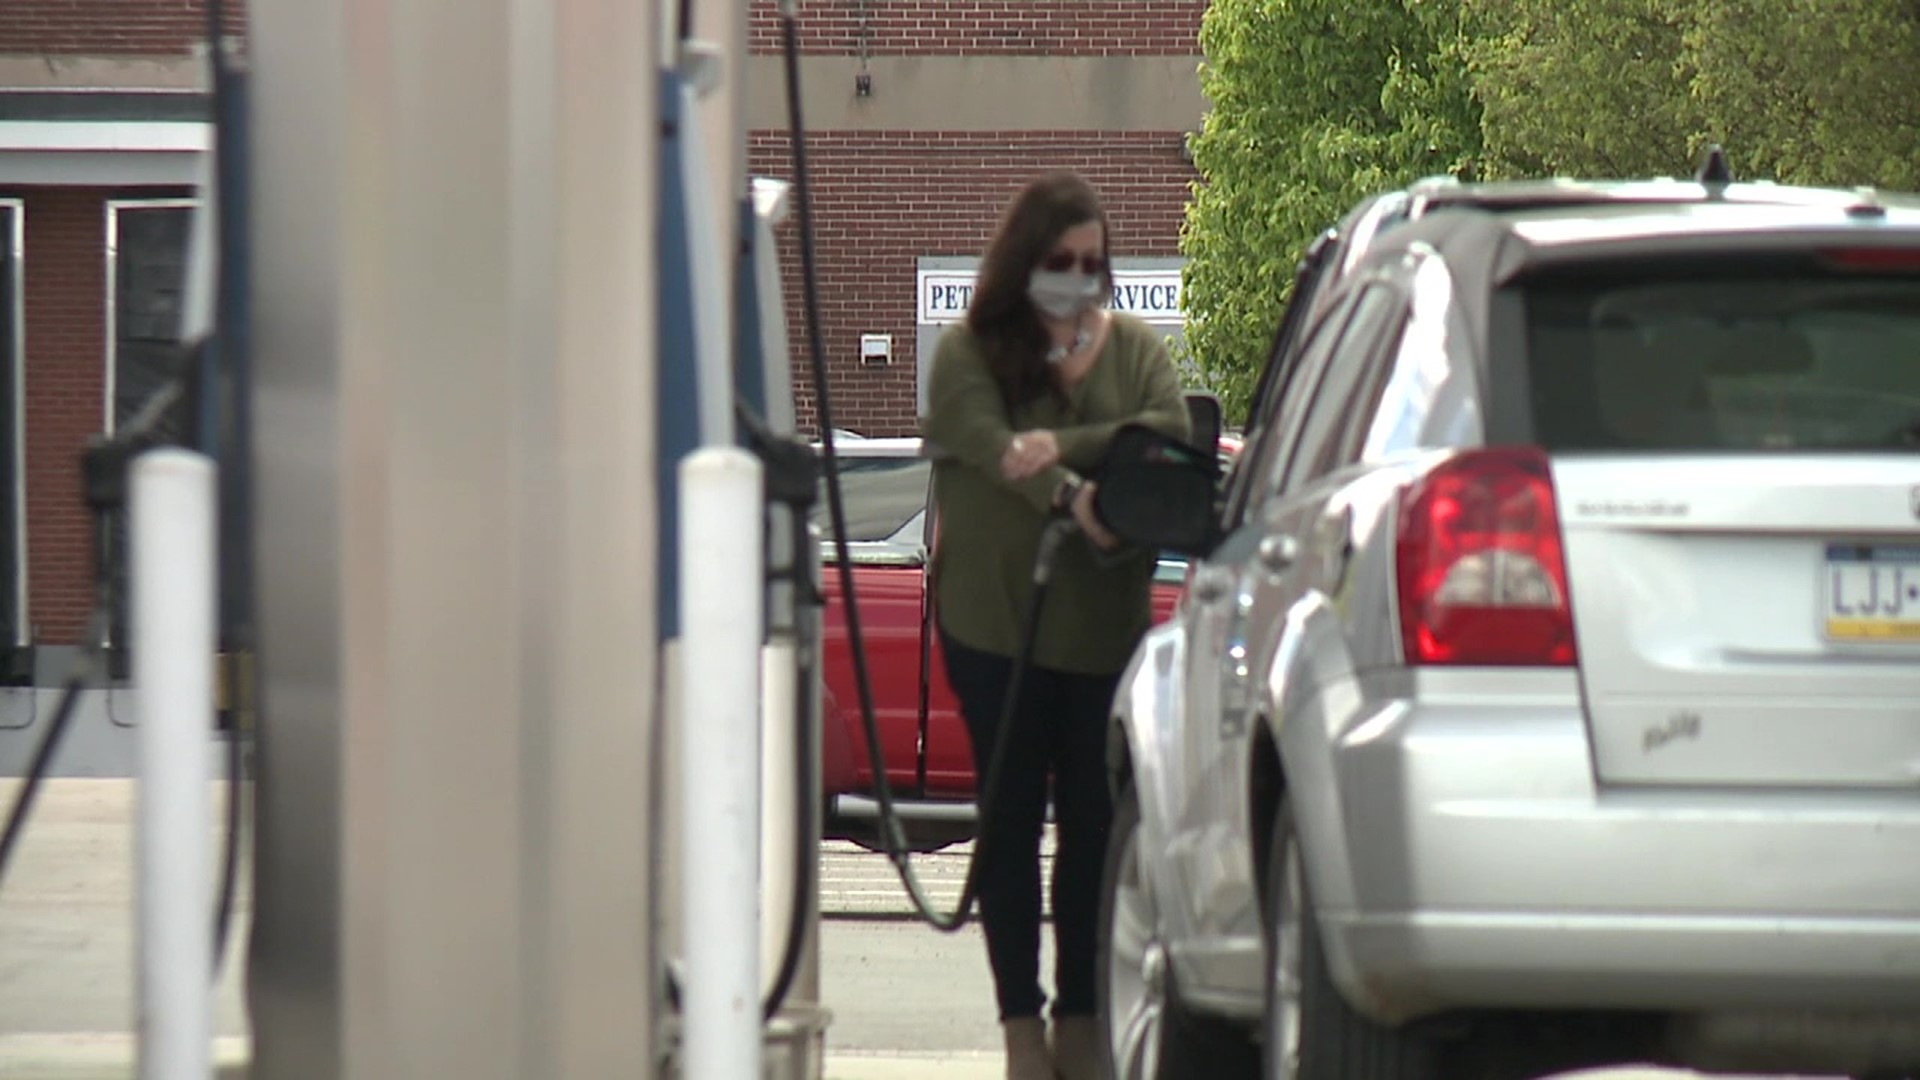 Drivers in Wilkes-Barre are seeing more panic buying than gas shortages.